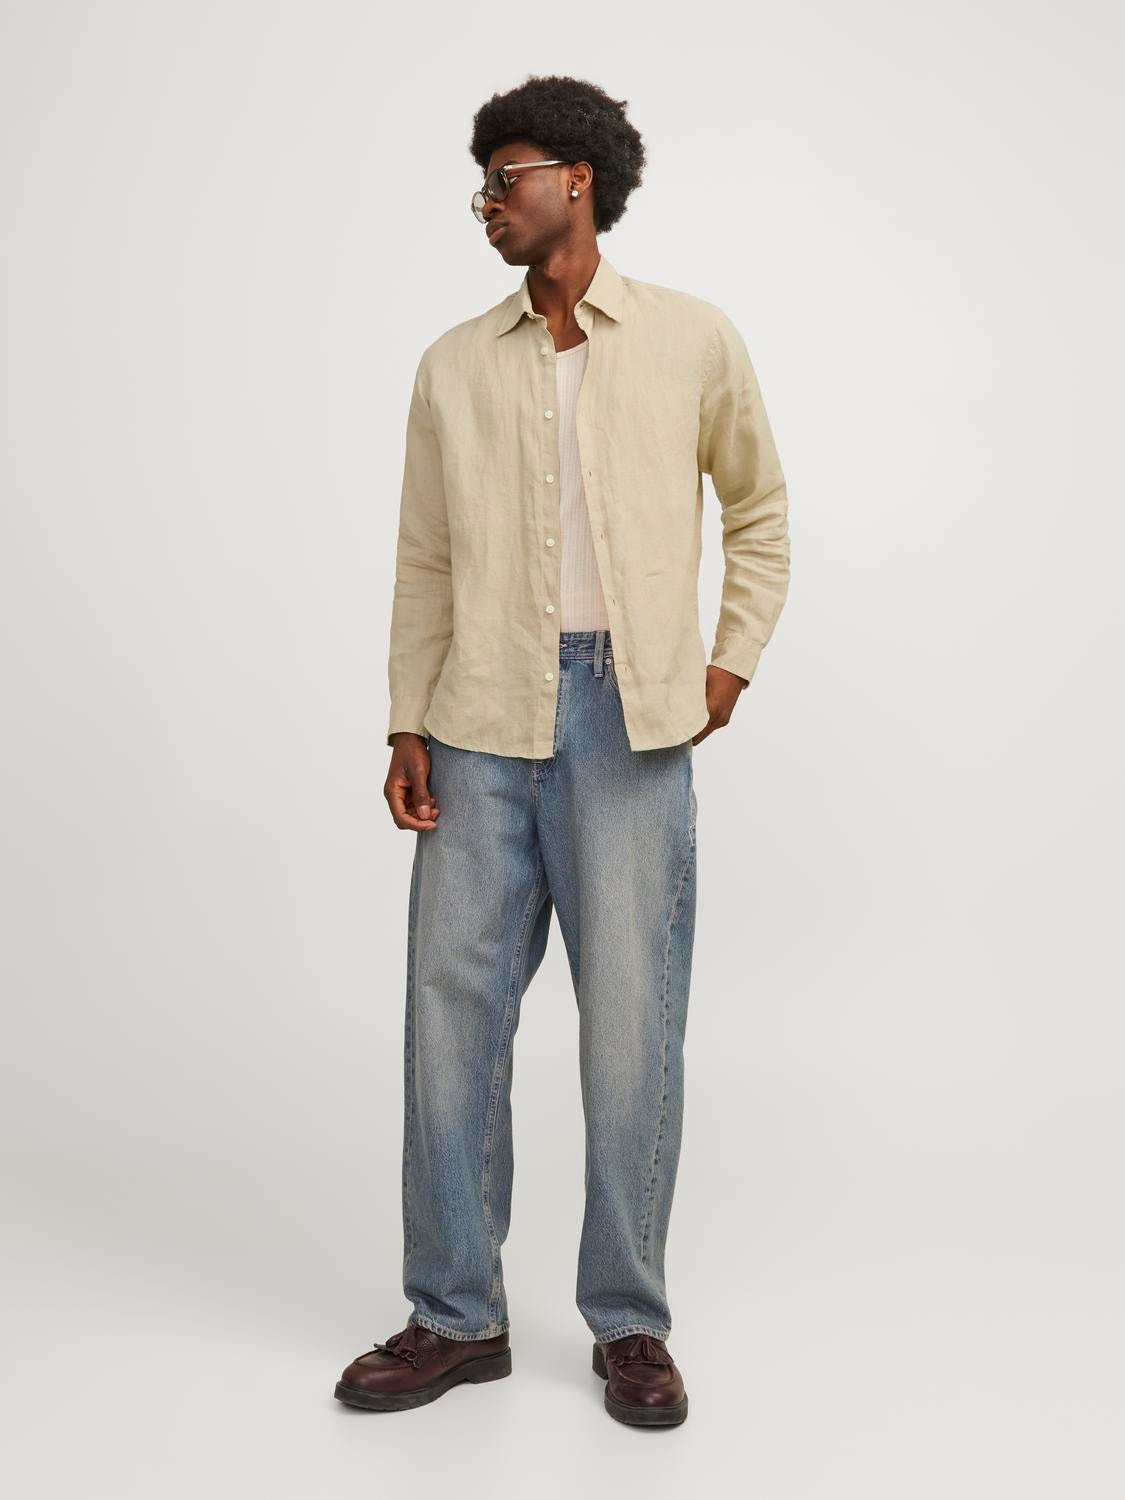 Jack & Jones Camicia Relaxed Fit -Fields Of Rye - 12251844